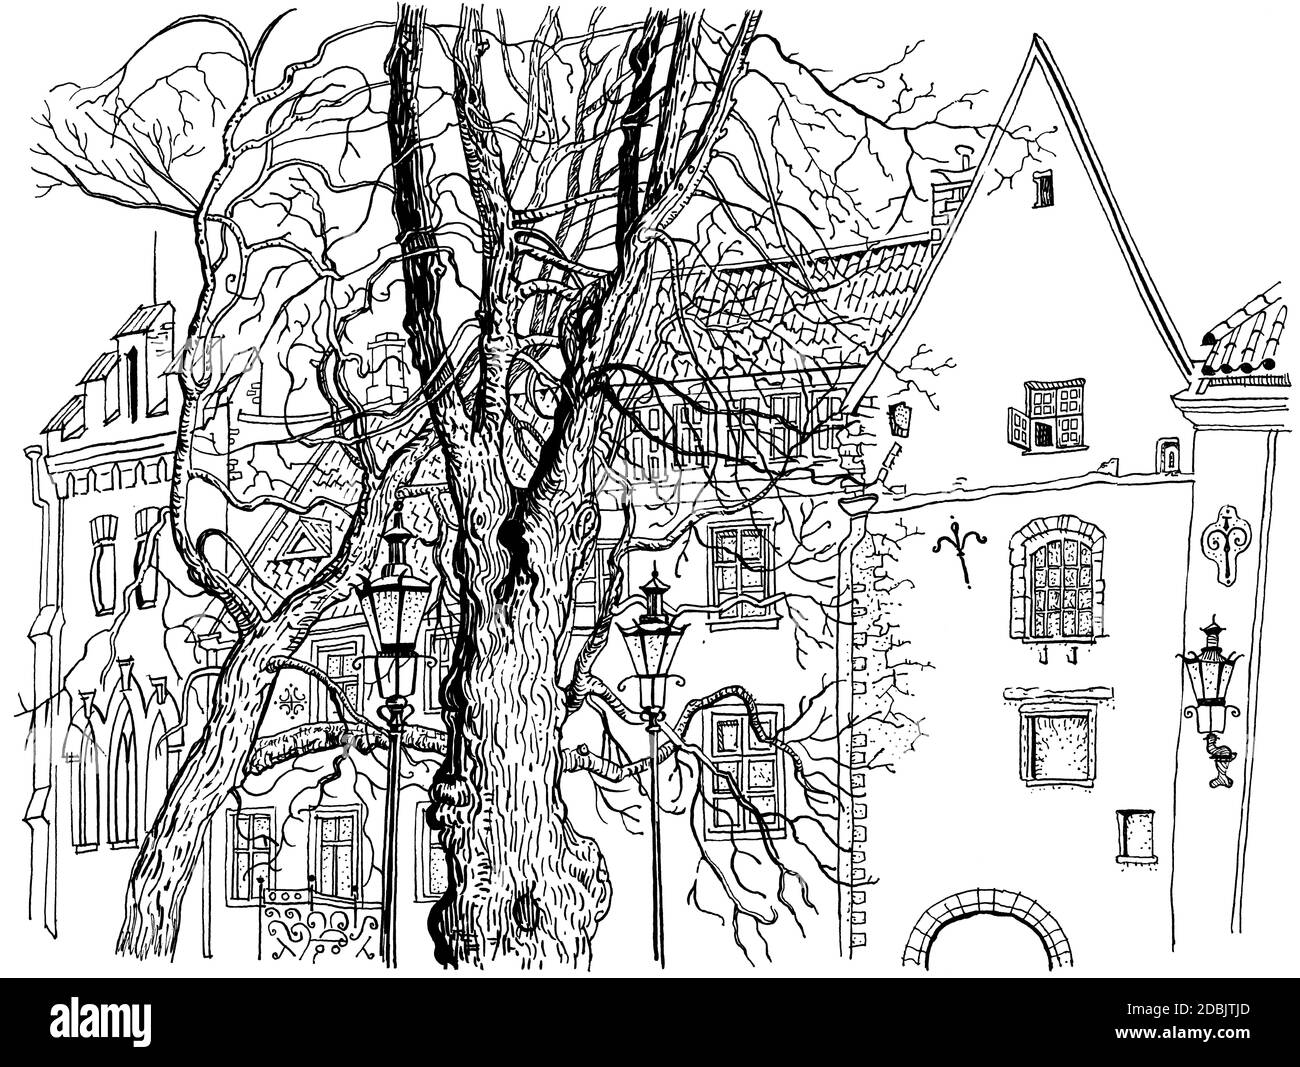 Tallinn Old Town view. Hand drawn graphic style ink pen illustration. Historical architecture, medieval houses, trees. Baltic states Stock Photo